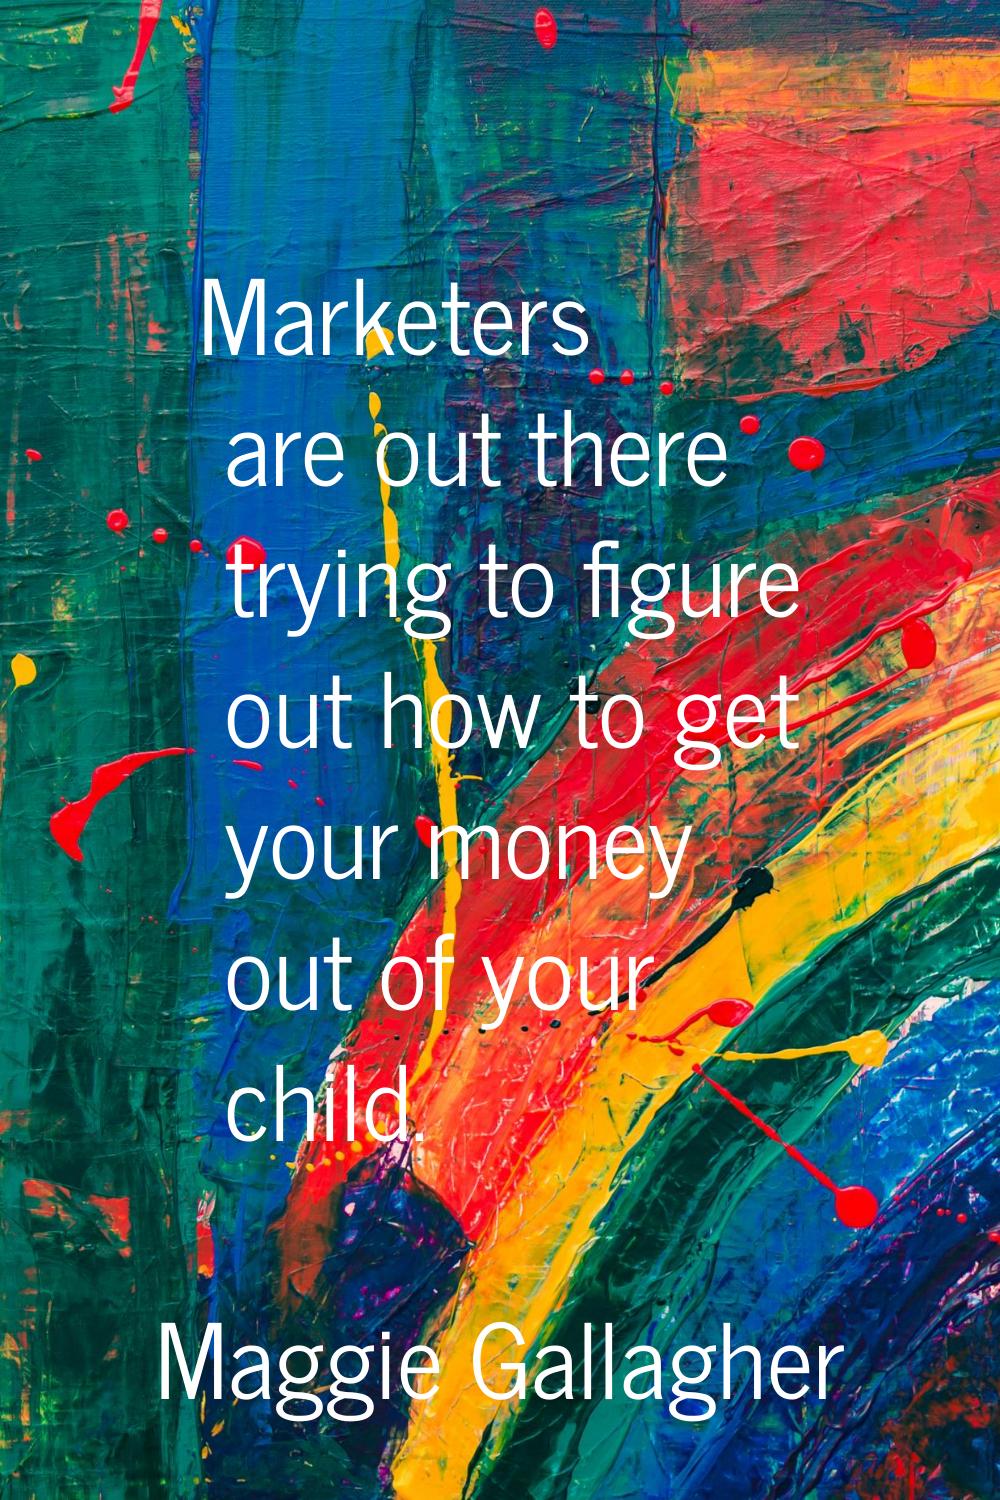 Marketers are out there trying to figure out how to get your money out of your child.